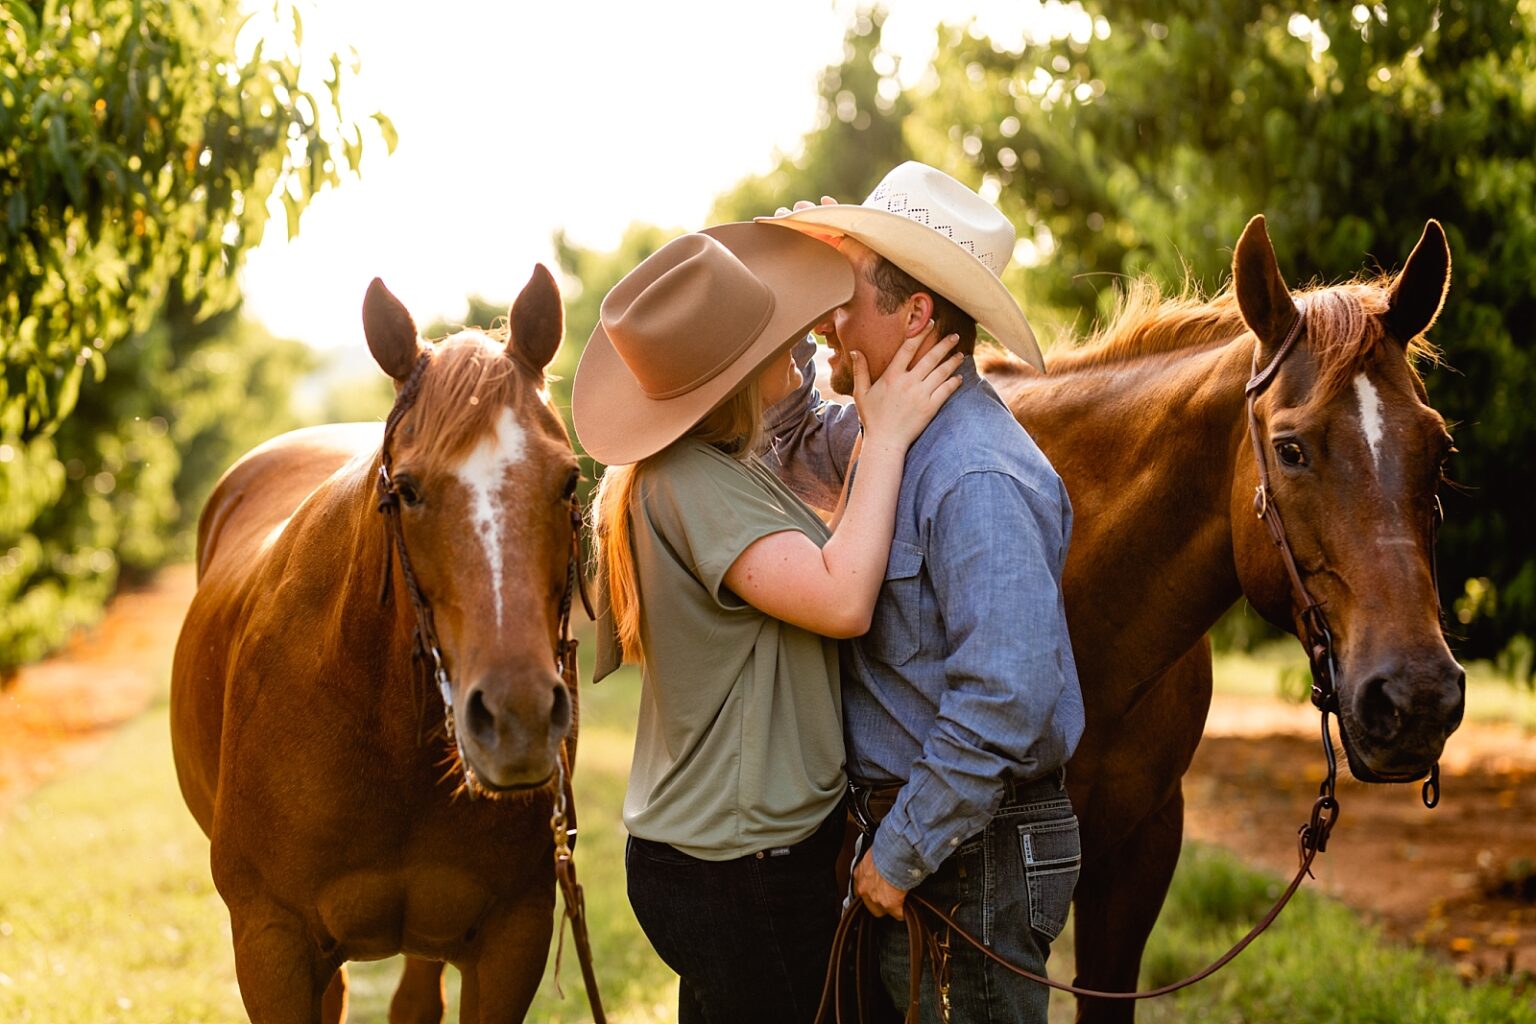 Posing ideas for couples with two horses. Western couple takes photos together with two horses in Northern Alabama.